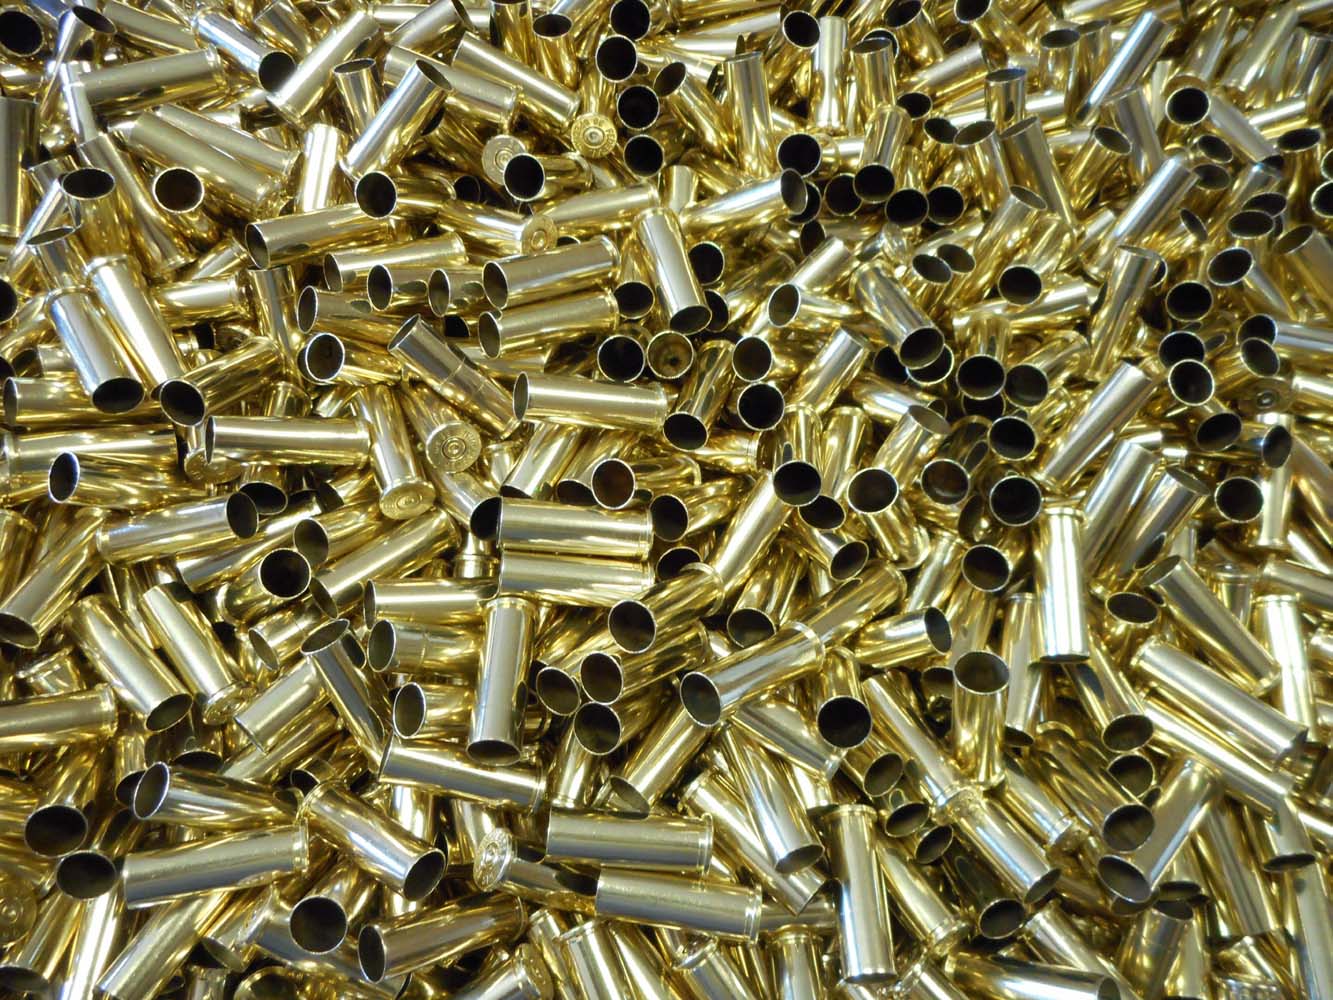 38 Special once fired brass casings - Other Reloading Supplies at